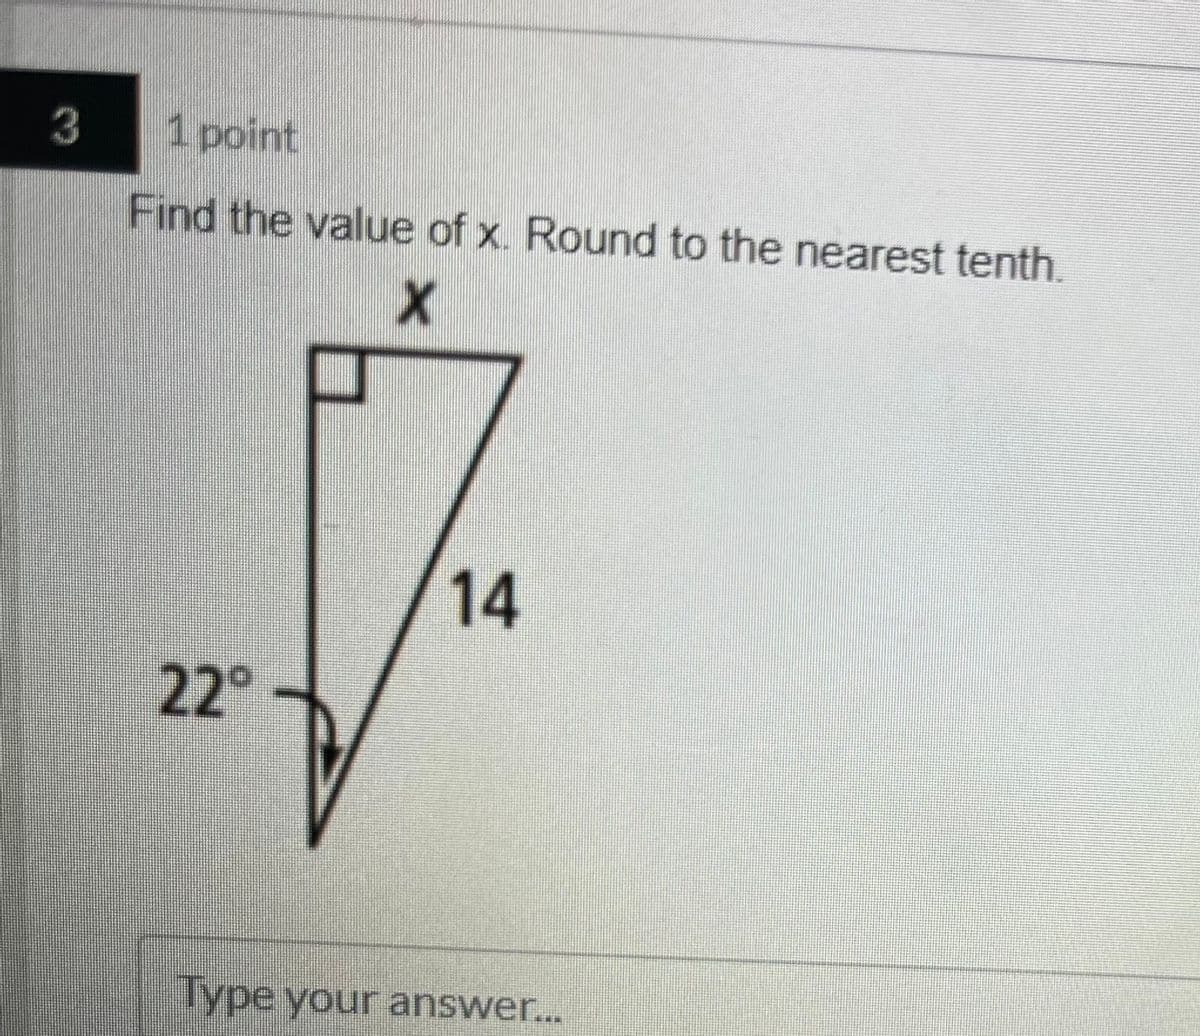 3
1 point
Find the value of x. Round to the nearest tenth.
14
22°
Type your answer..
